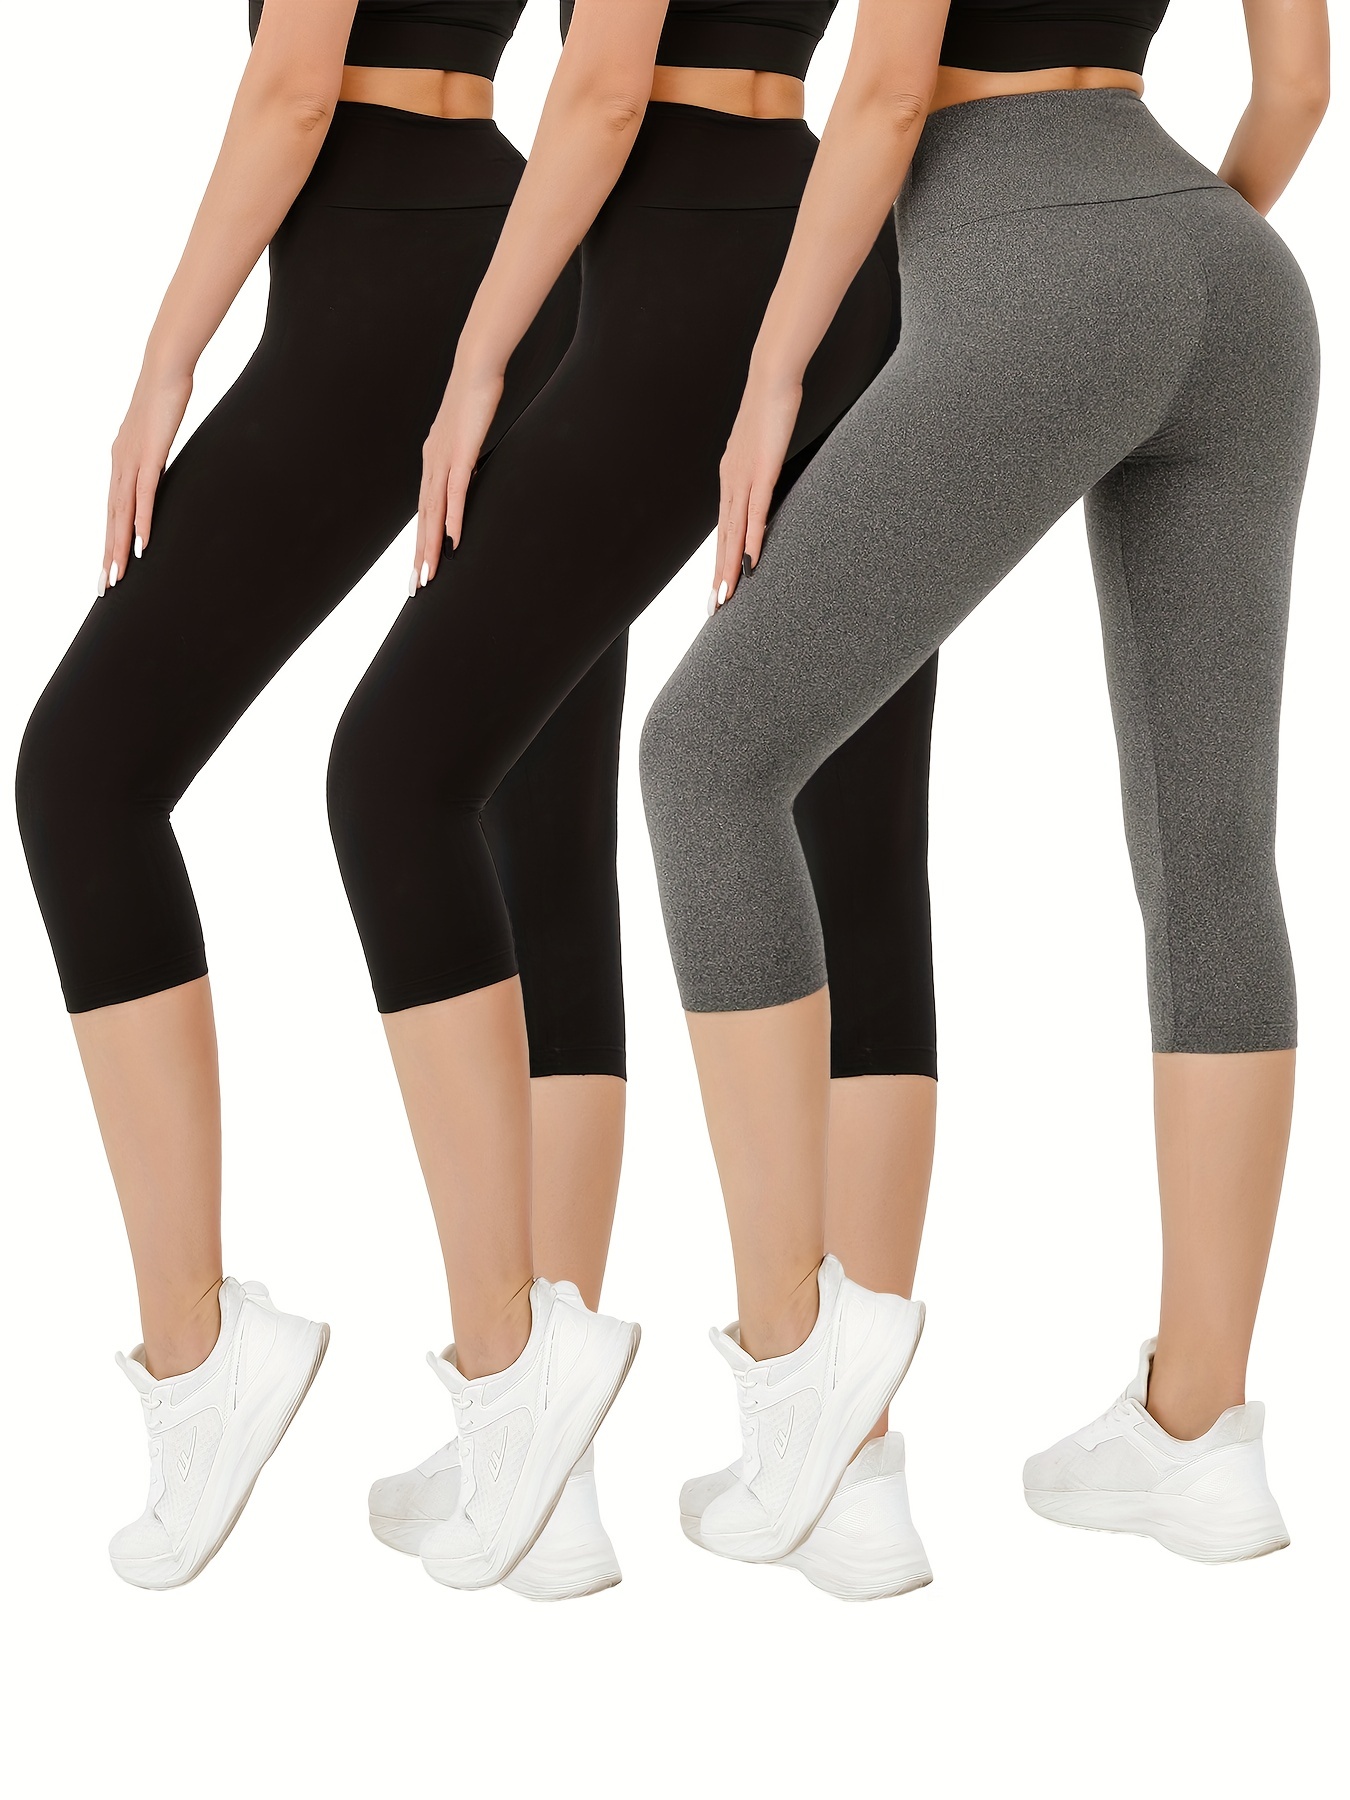 YWDJ Tights for Women Workout Capris High Waist Running Sports Yogalicious  Utility Dressy Everyday Soft Run Fast Tights for Women High Waist Capris  Running Pants Quick Dry Sports Yoga Pants Pink M 